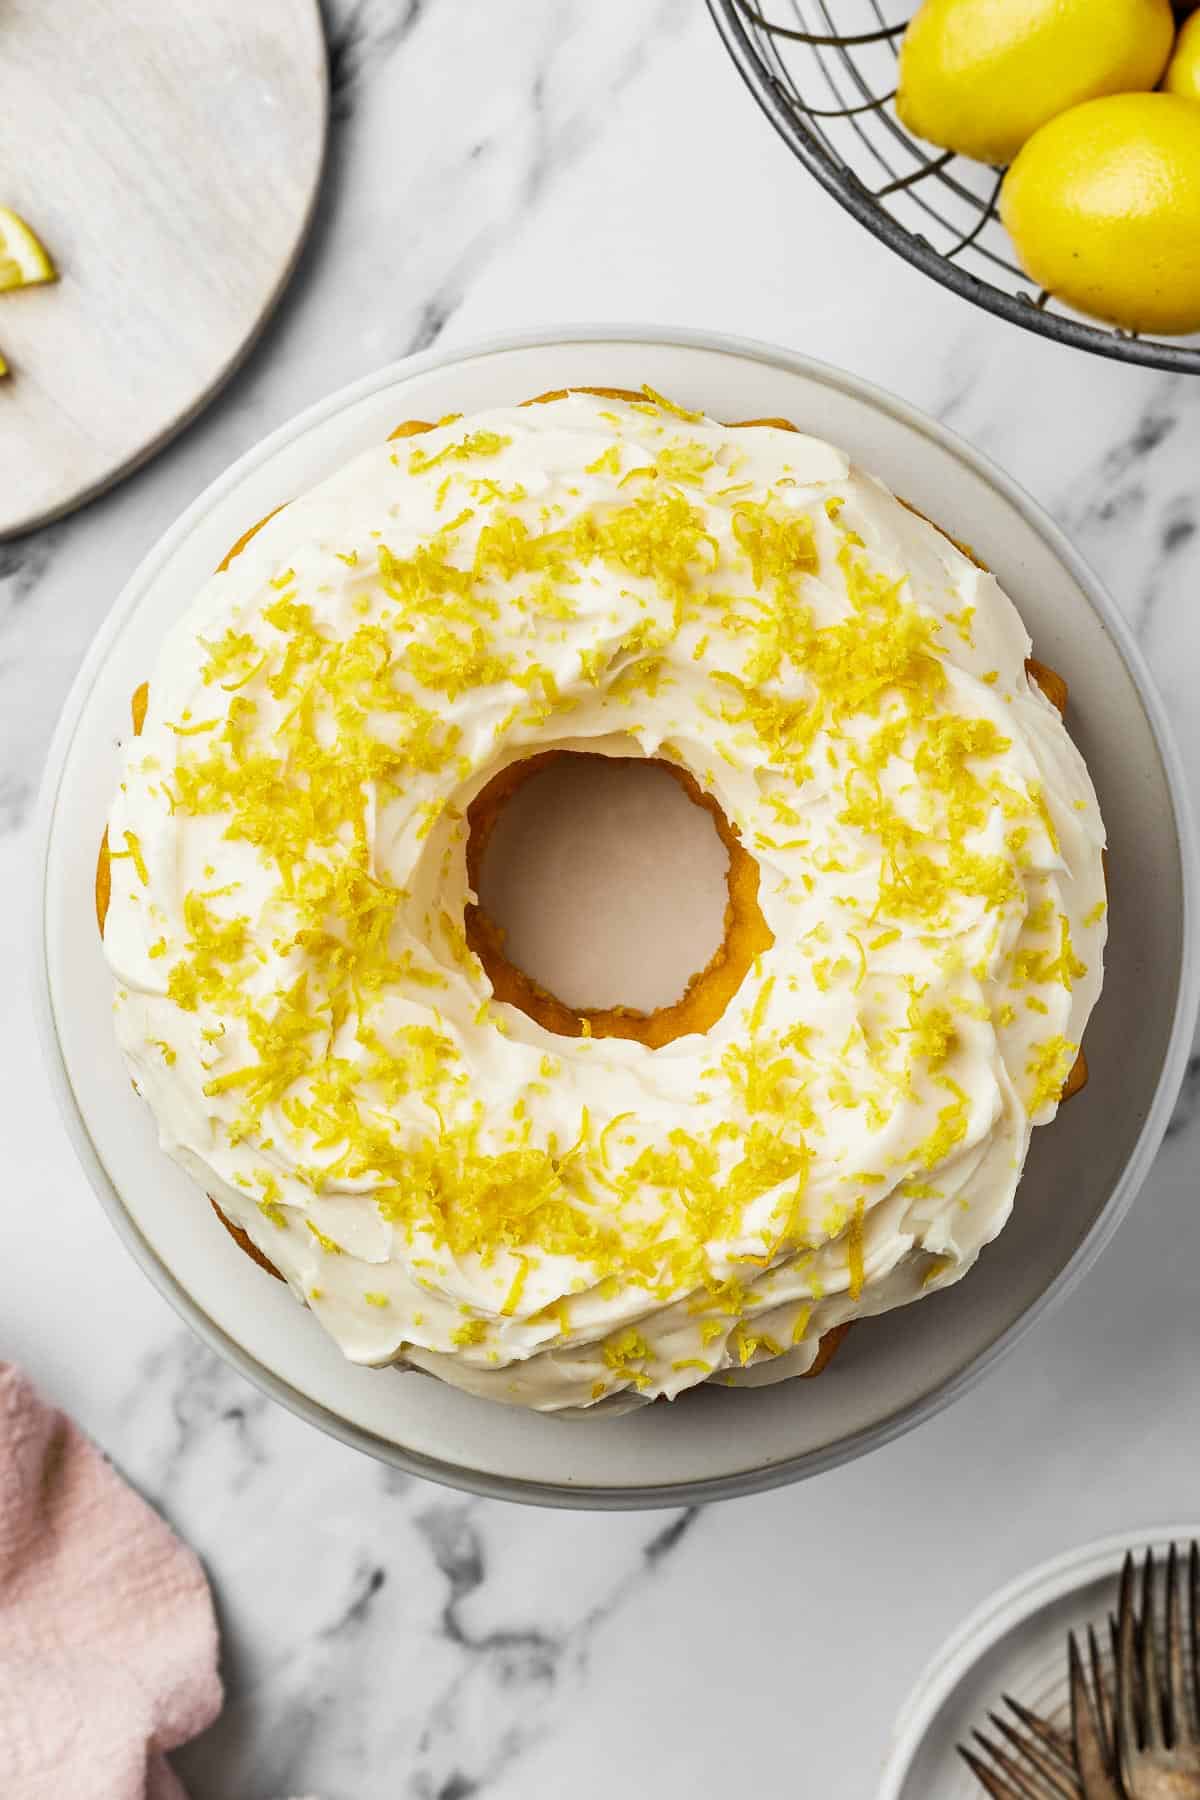 A decorated cake with white frosting and lemon zest on a round white plate.